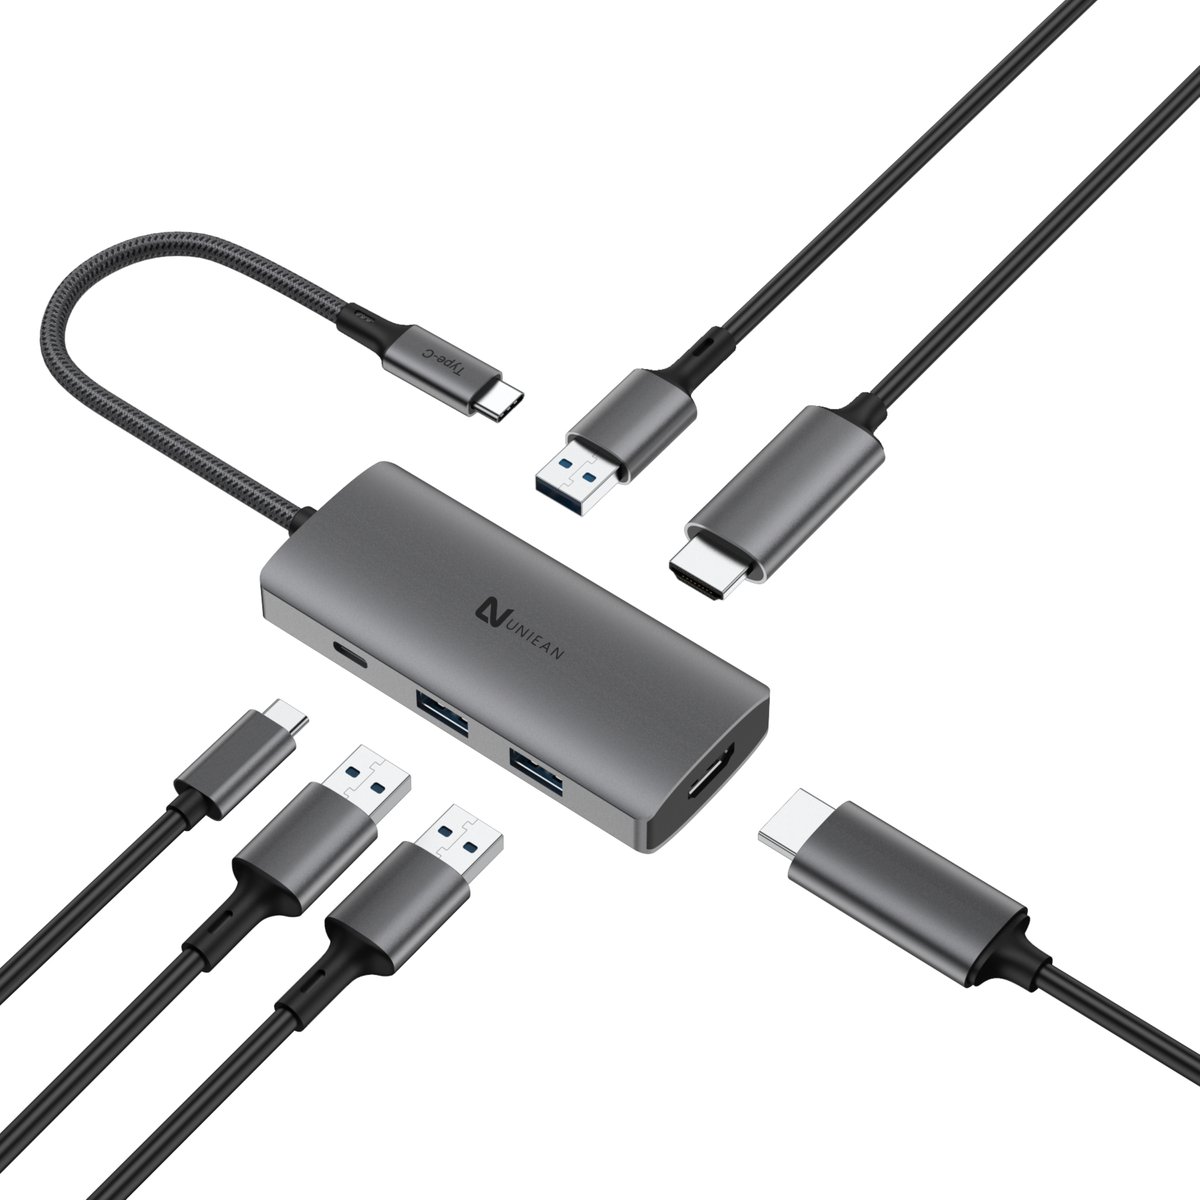 UNIEAN 6 in 1 Docking Station - USB-C HUB - Dual Monitor - voor Laptops & Computers - 2x HDMI 4K, USB-C PD100W, USB-A 3.0, 2x USB-A 2.0 - voor HP, Asus, Lenovo, Dell, Acer, Microsoft, Samsung, MSI, Medion, PEAQ